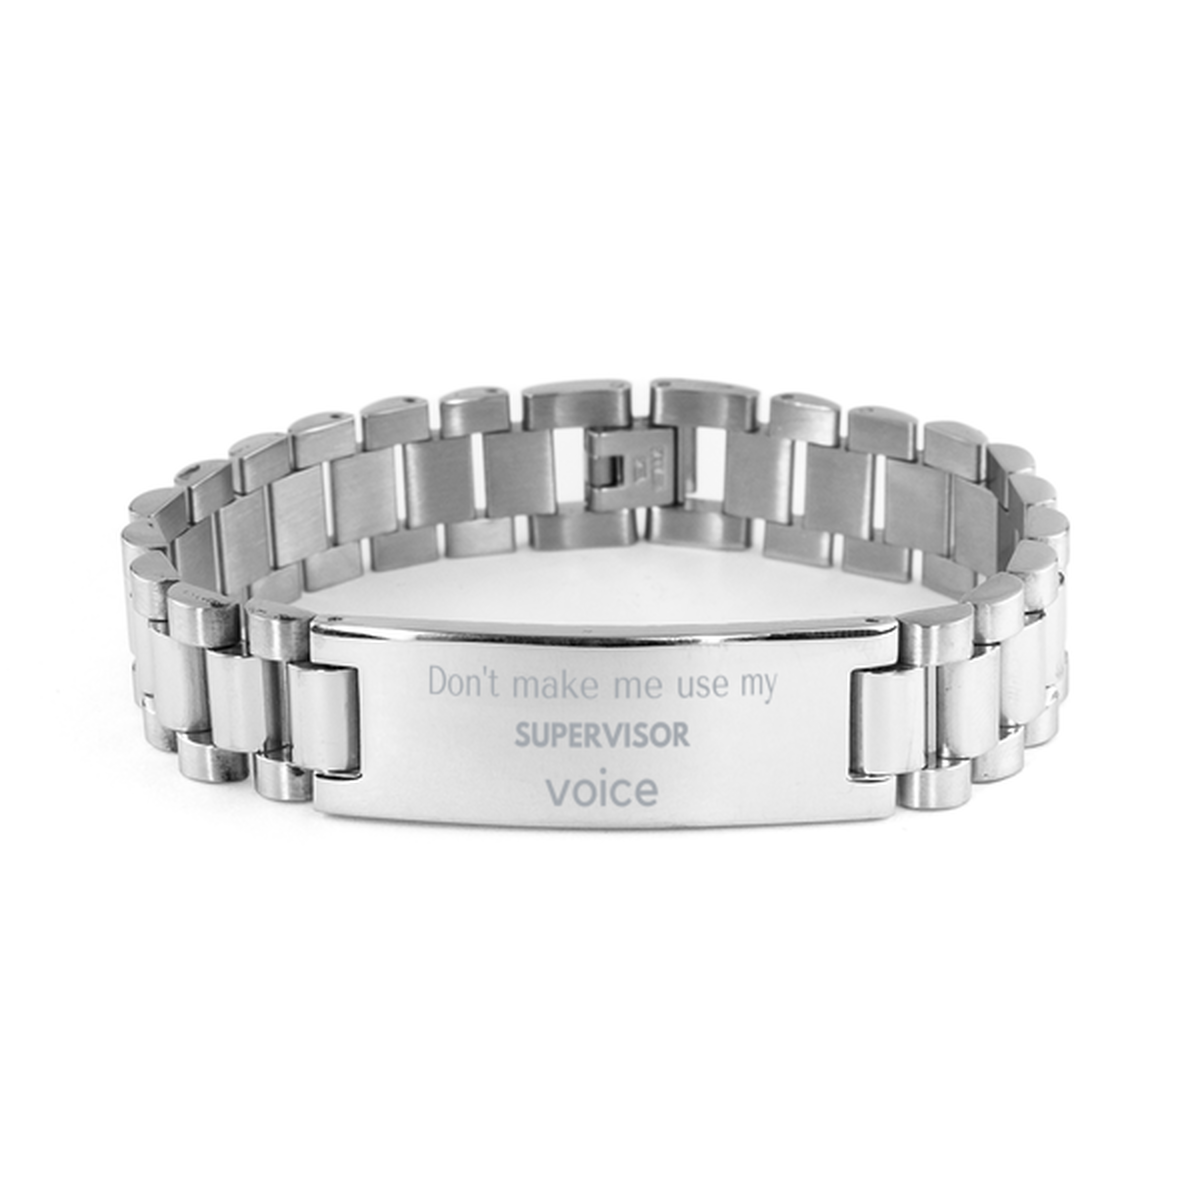 Don't make me use my Supervisor voice, Sarcasm Supervisor Gifts, Christmas Supervisor Ladder Stainless Steel Bracelet Birthday Unique Gifts For Supervisor Coworkers, Men, Women, Colleague, Friends